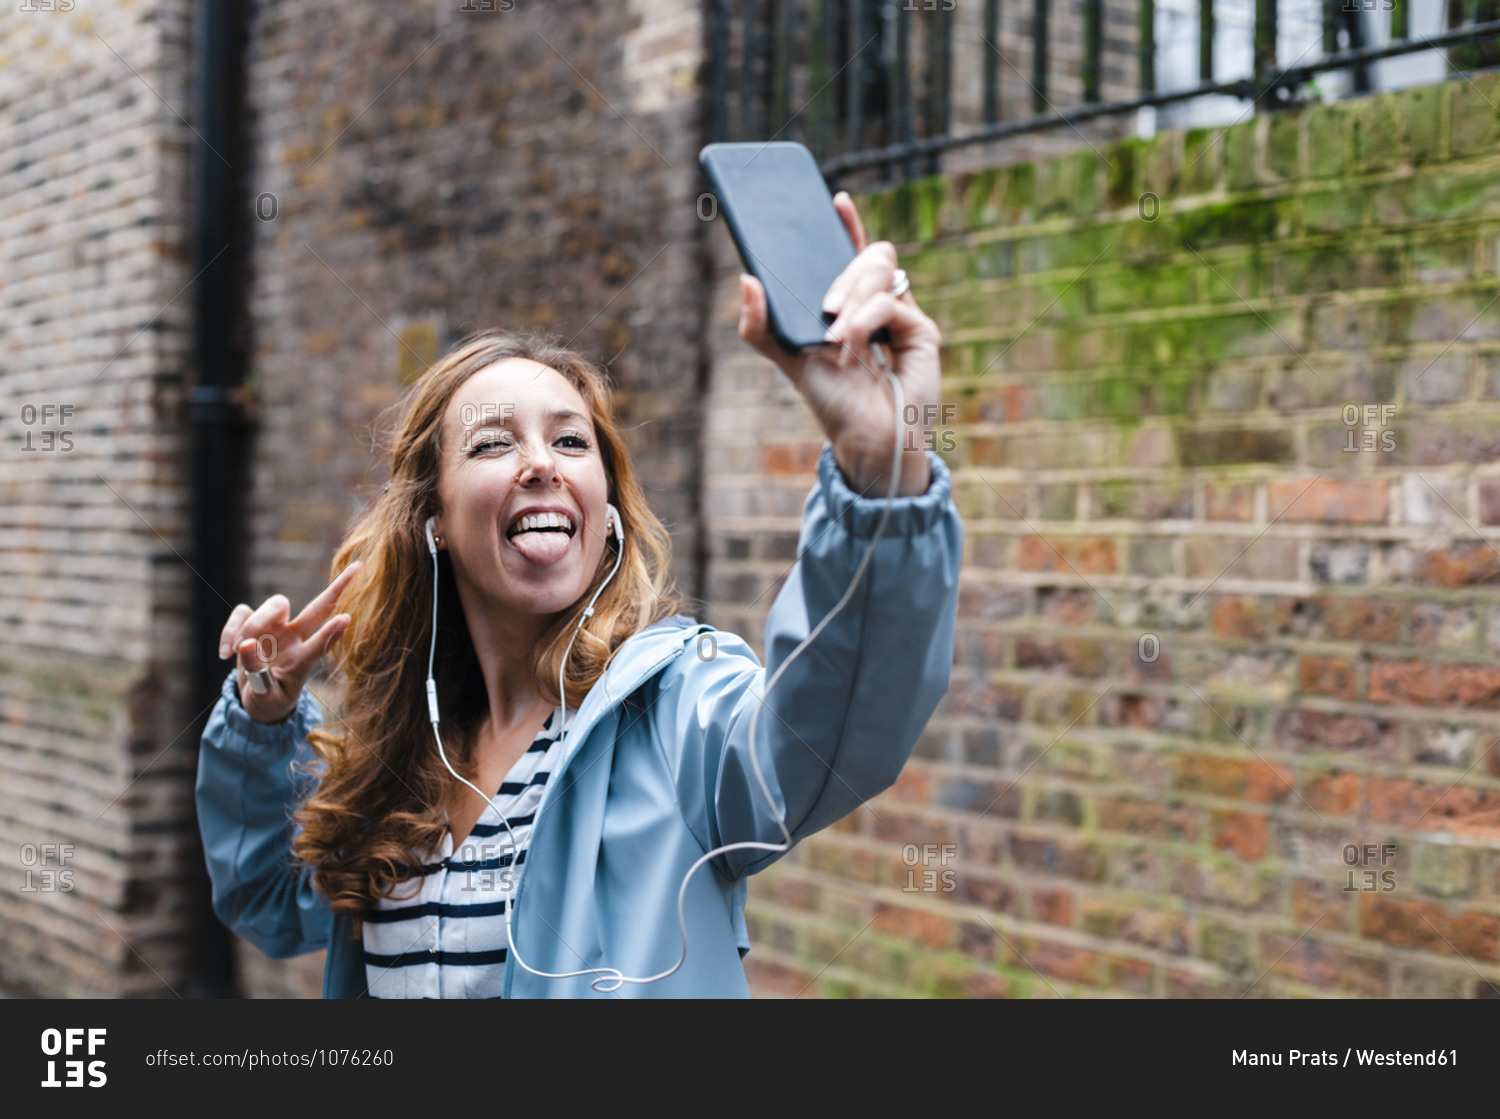 Carefree woman with in-ear headphones sticking tongue out while taking selfie through mobile phone in city